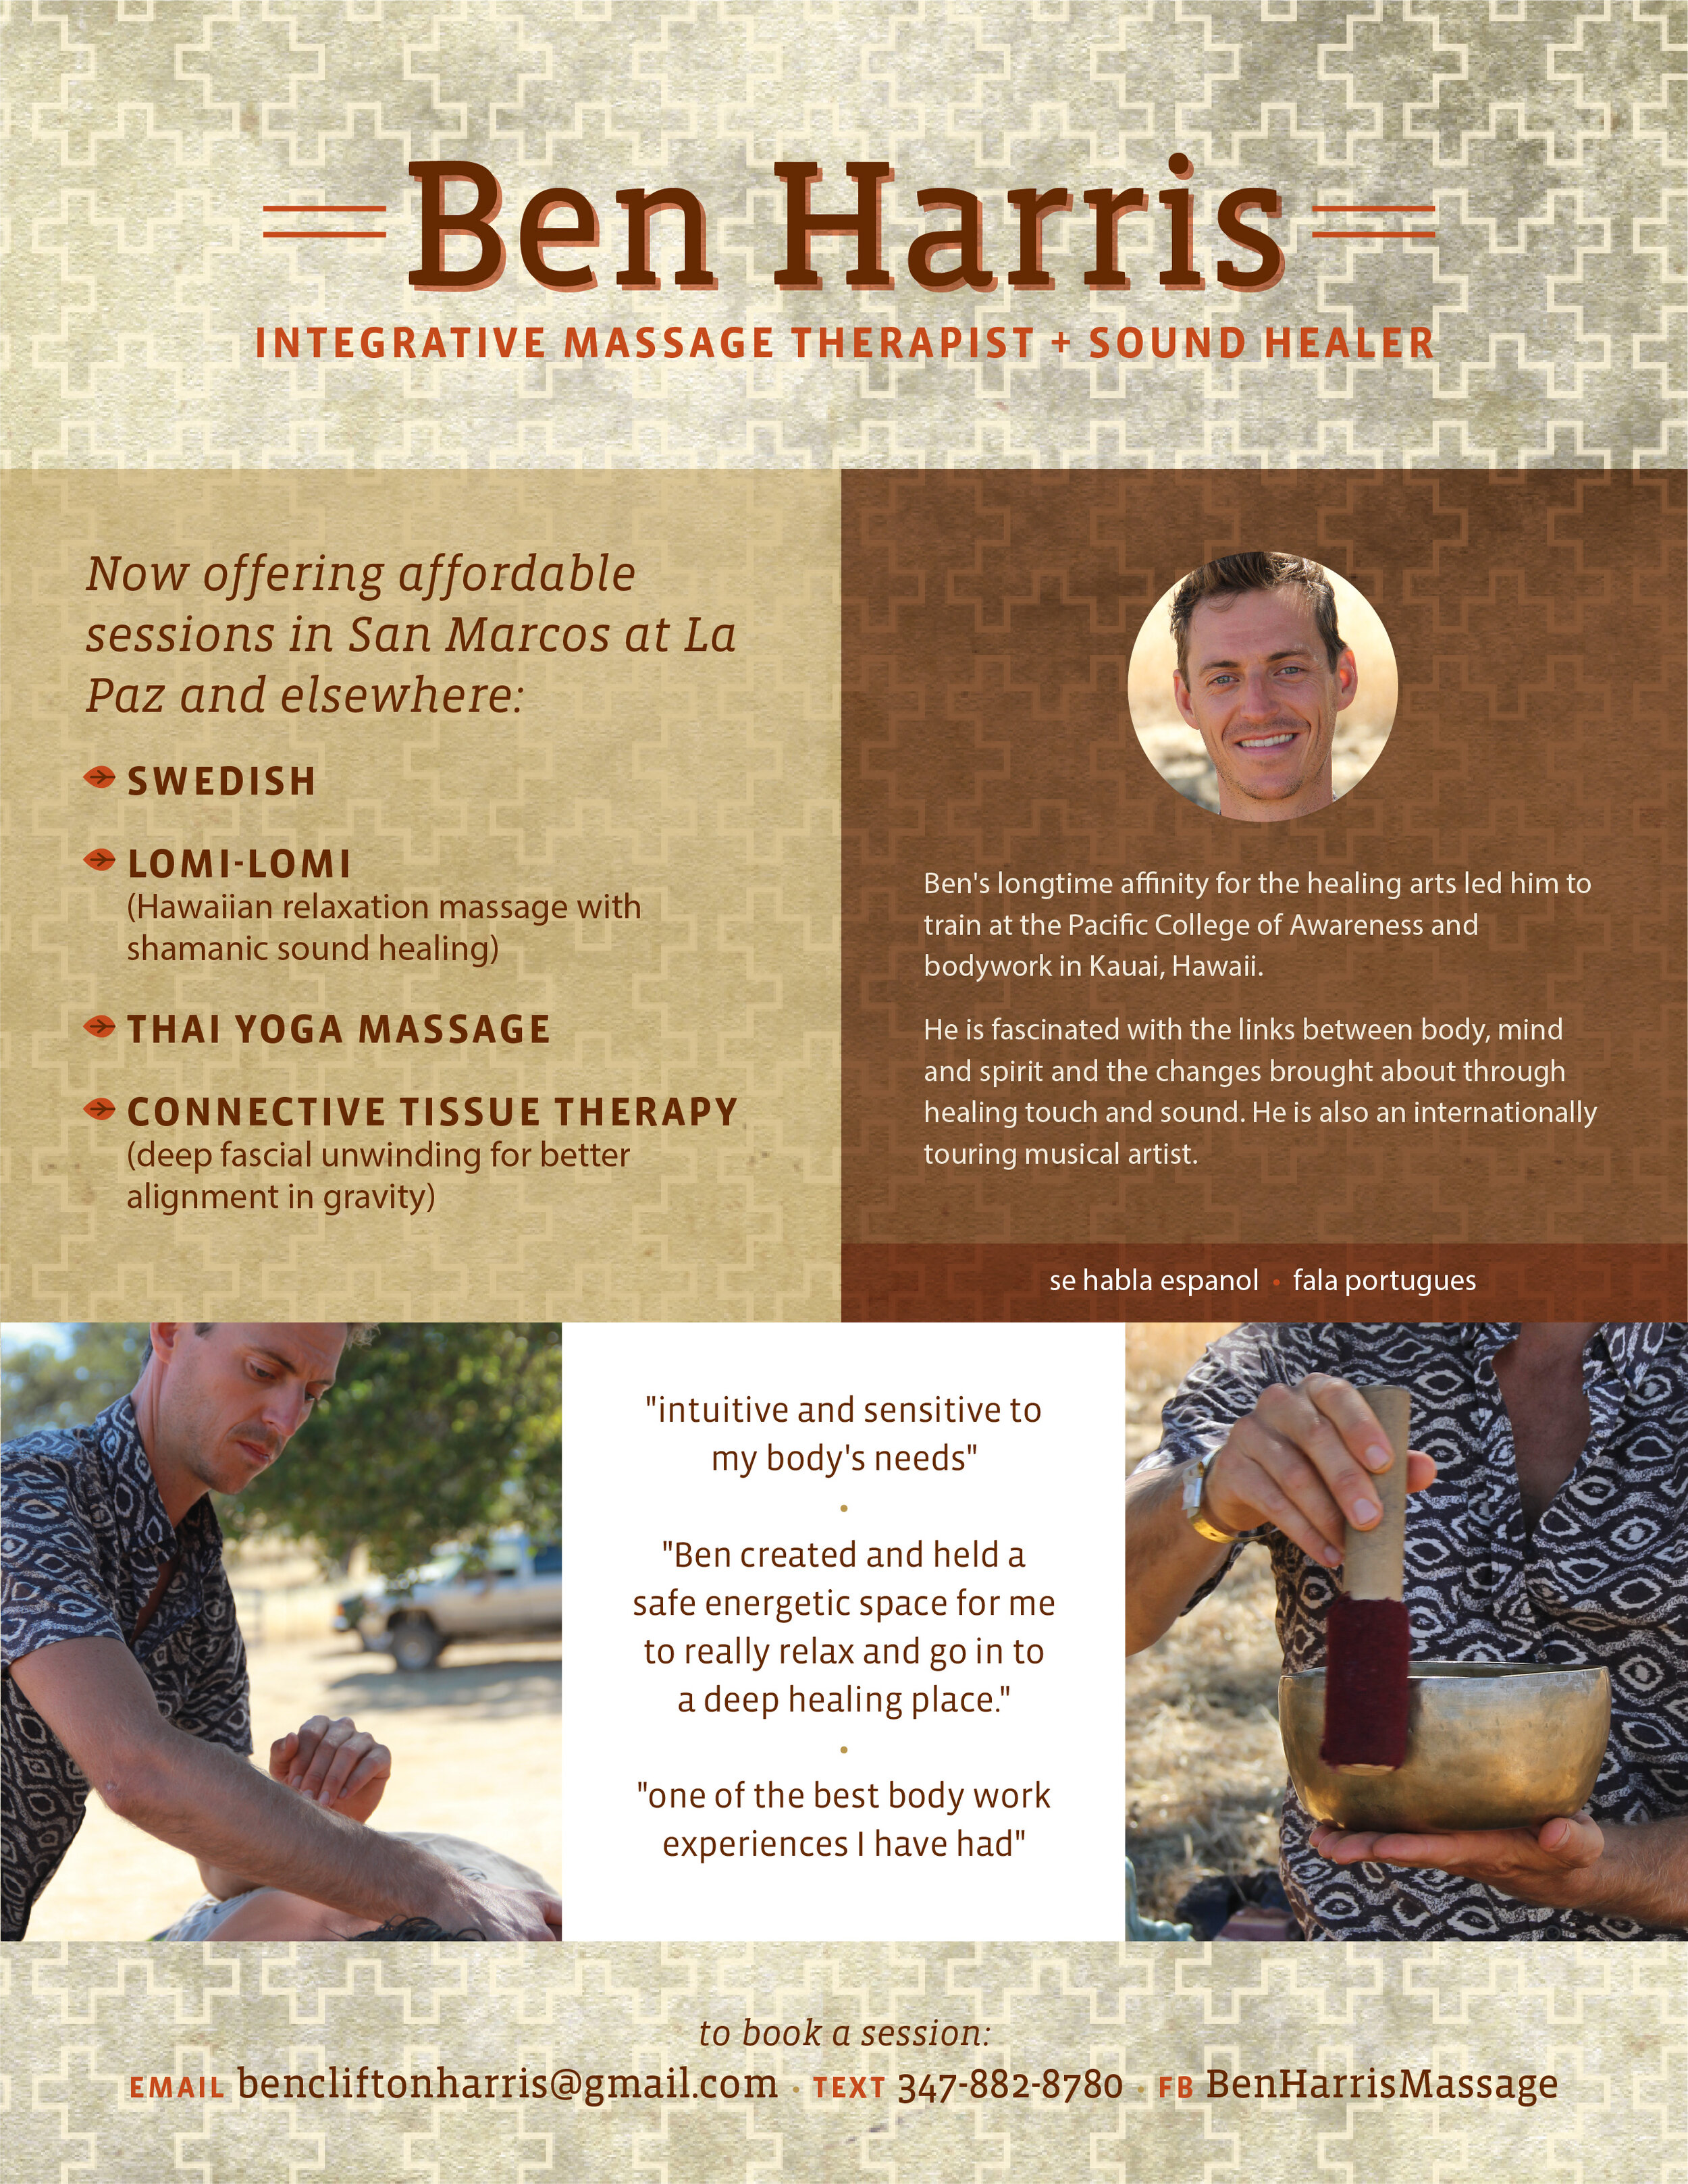  This printed flyer was designed to advertise the services of Integrative Massage Therapist + Sound Healer, Ben Harris. 